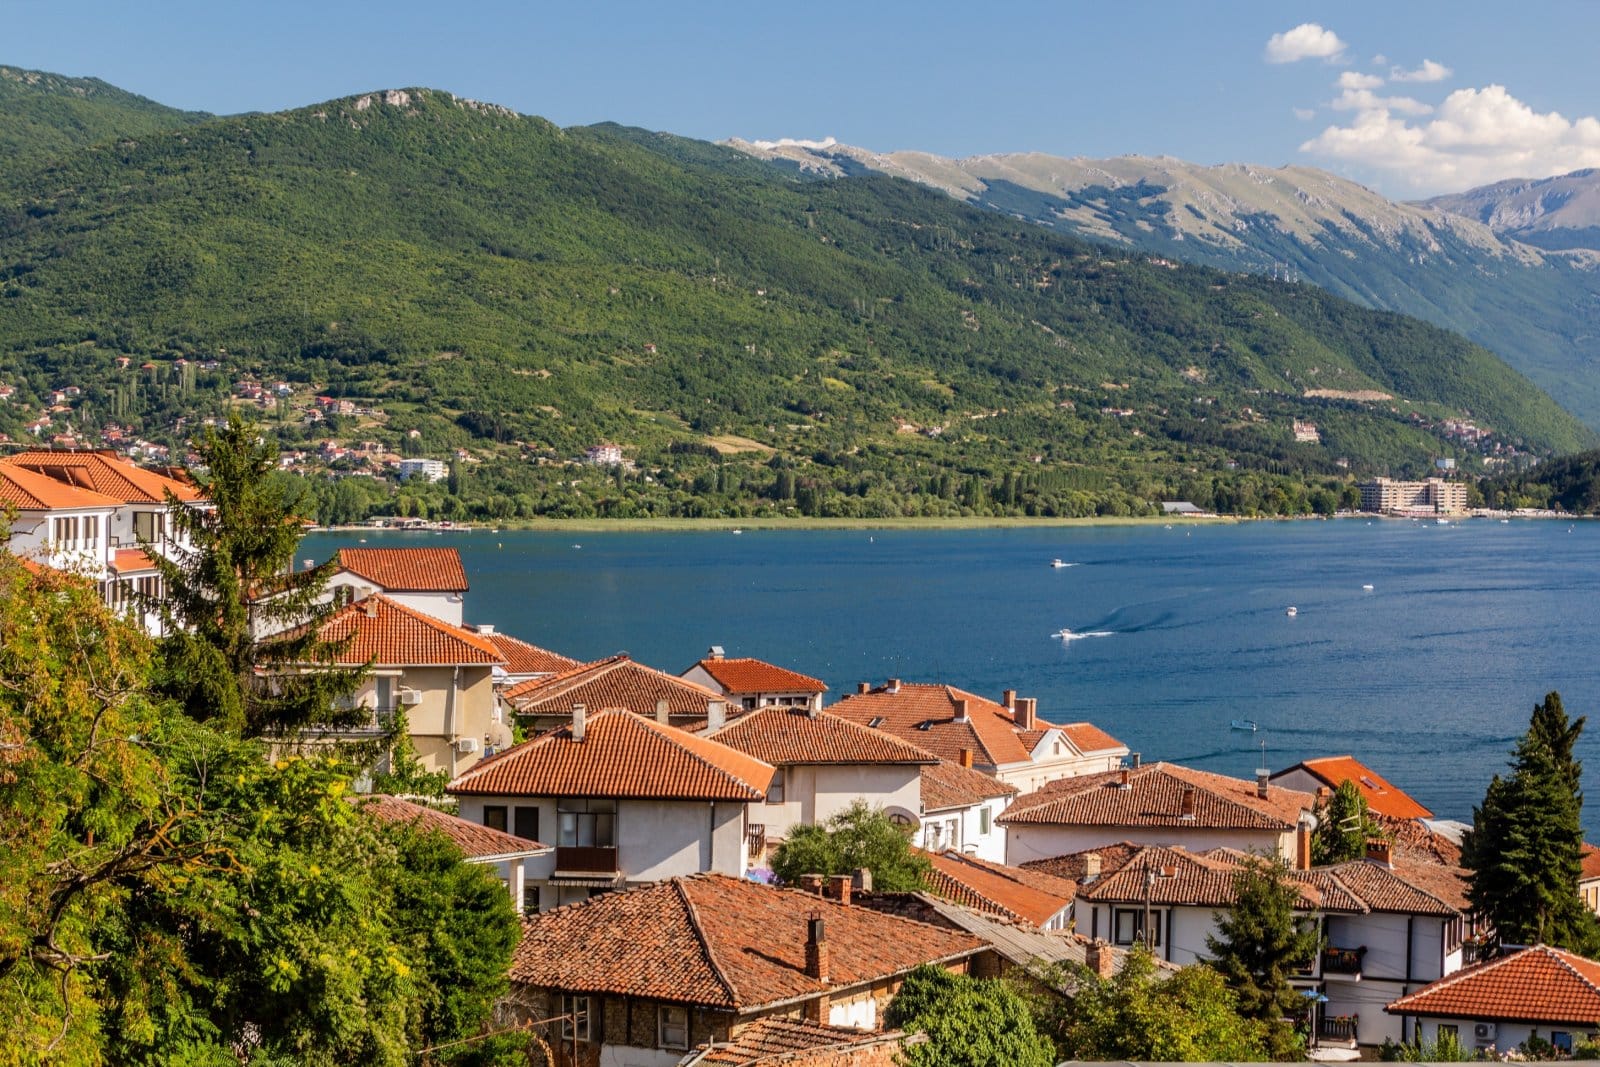 <p class="wp-caption-text">Image Credit: Shutterstock / Matyas Rehak</p>  <p>Ohrid is a lakeside paradise that boasts affordable accommodations and a tranquil atmosphere, perfect for budget-conscious nature lovers.</p>